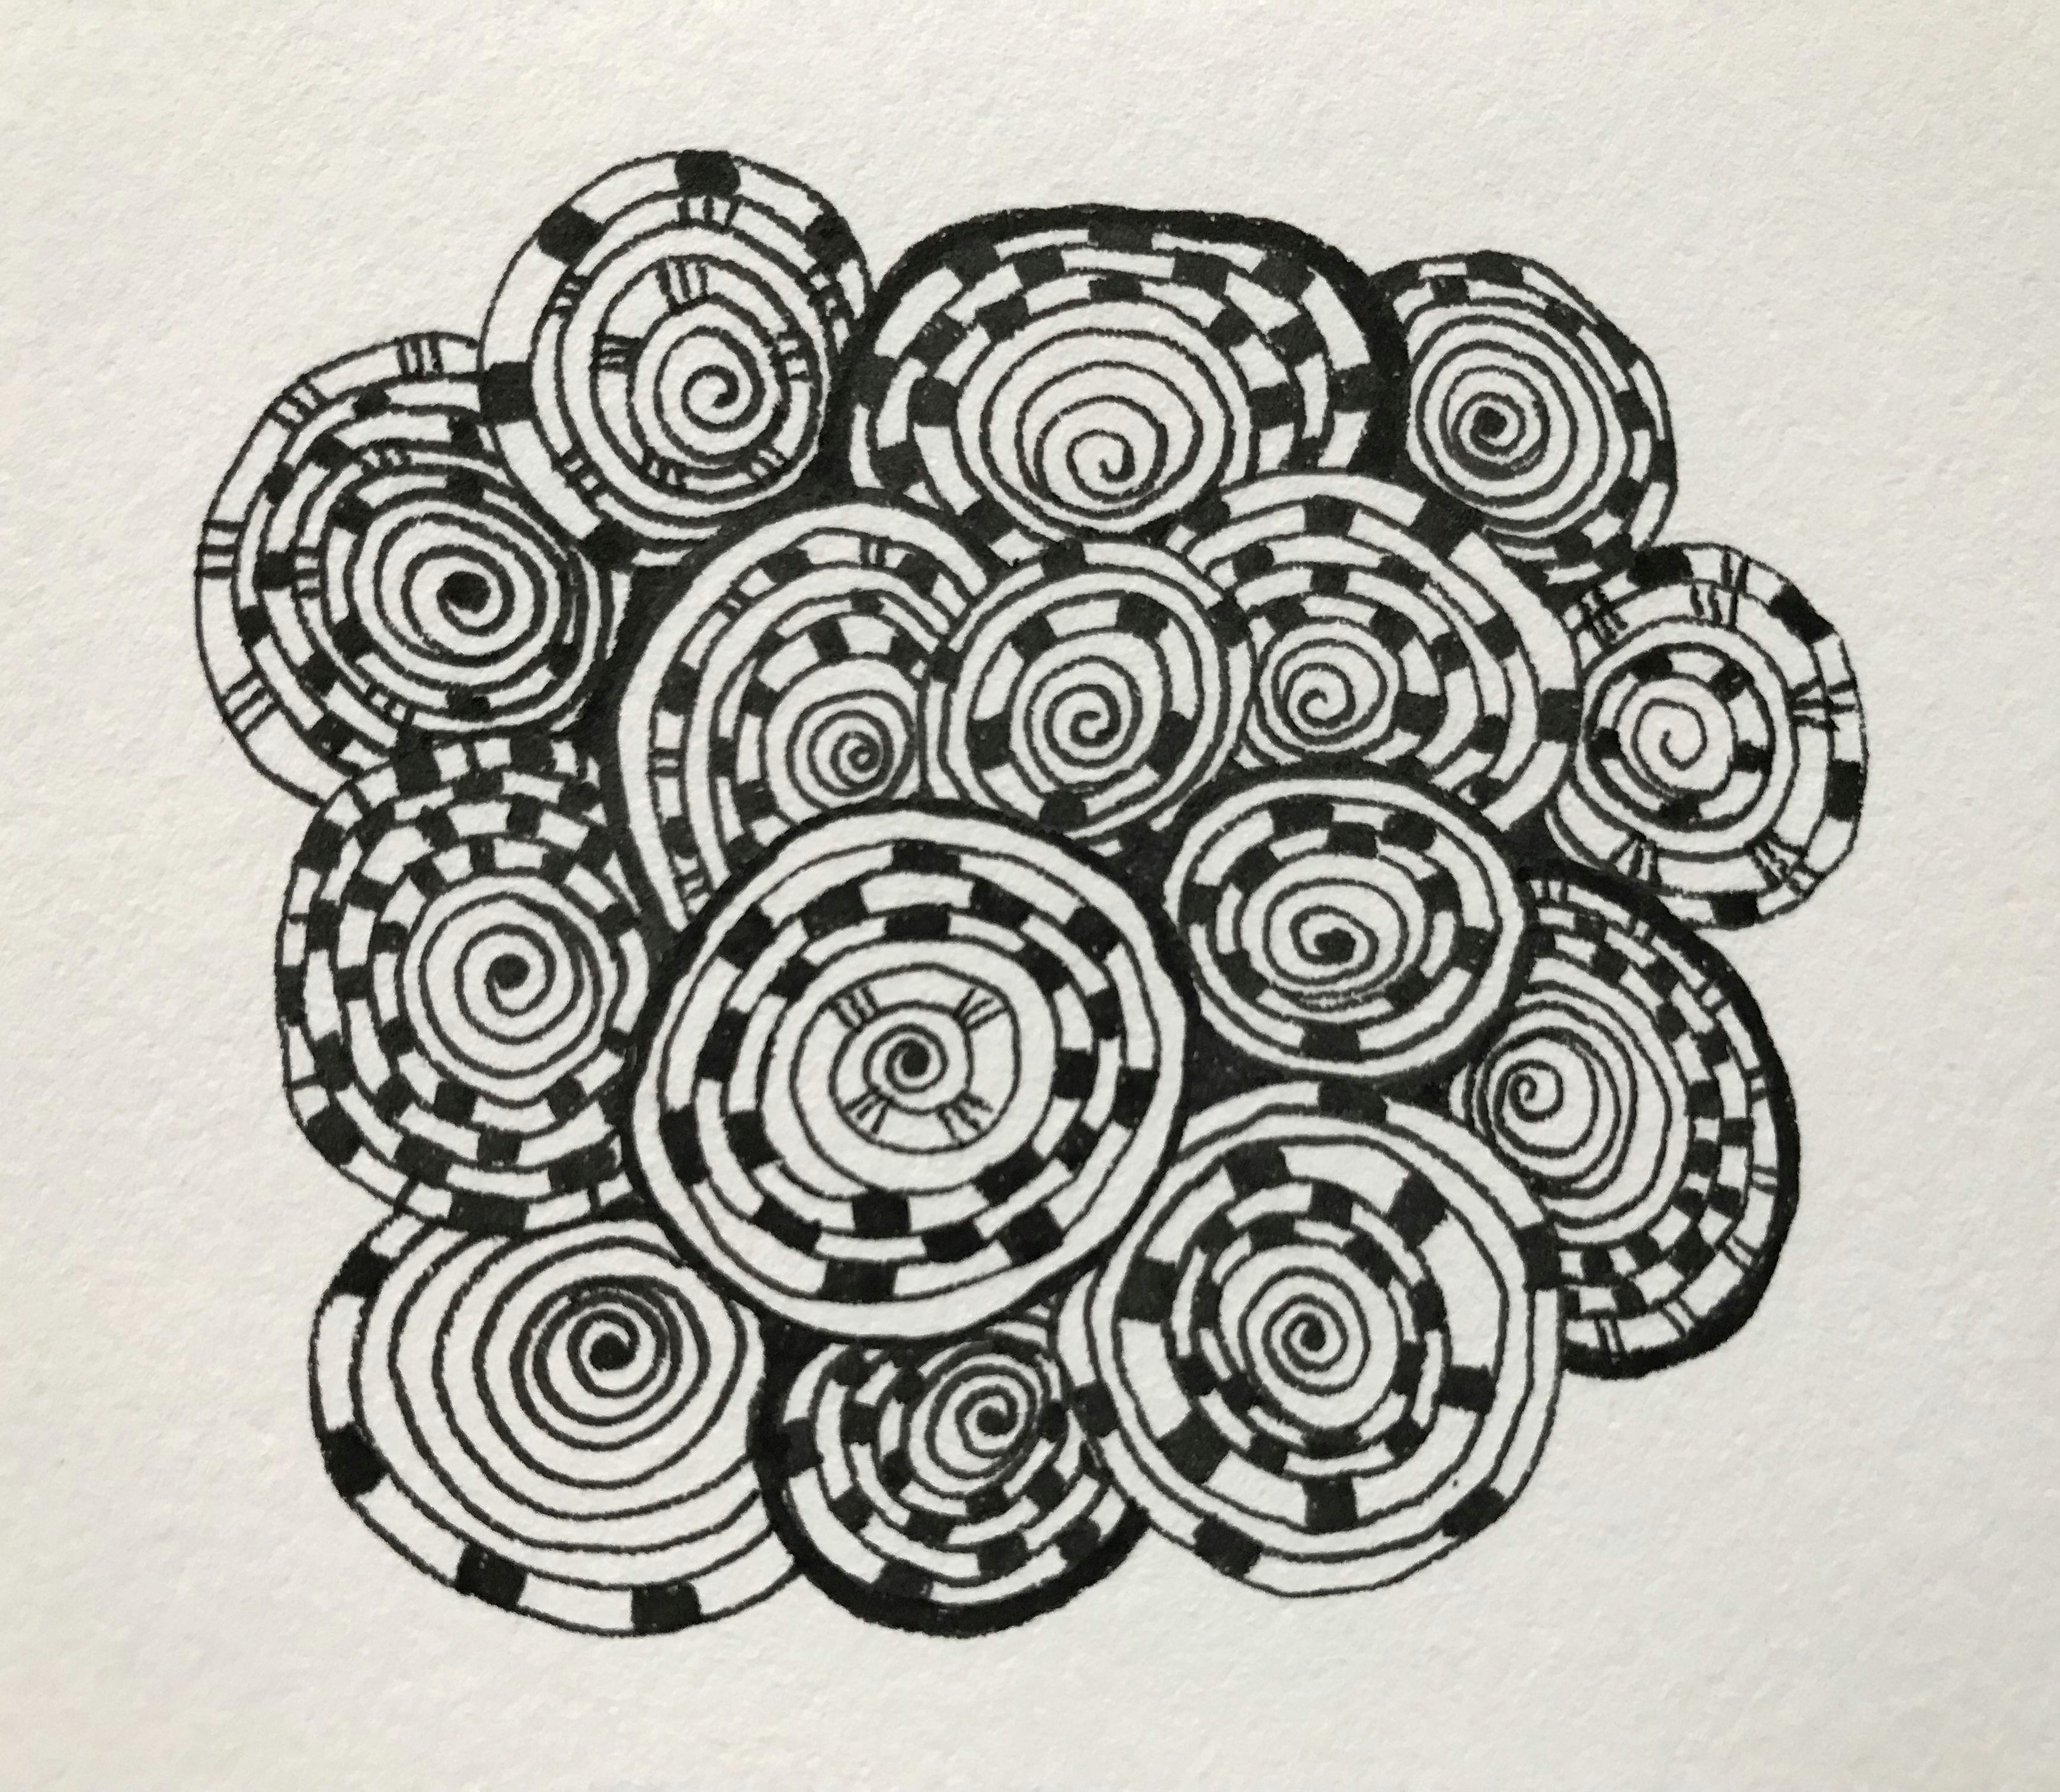 Drawing Ideas with Circles Small Tangle Circles Jo S Tangles In 2018 Pinterest Doodles